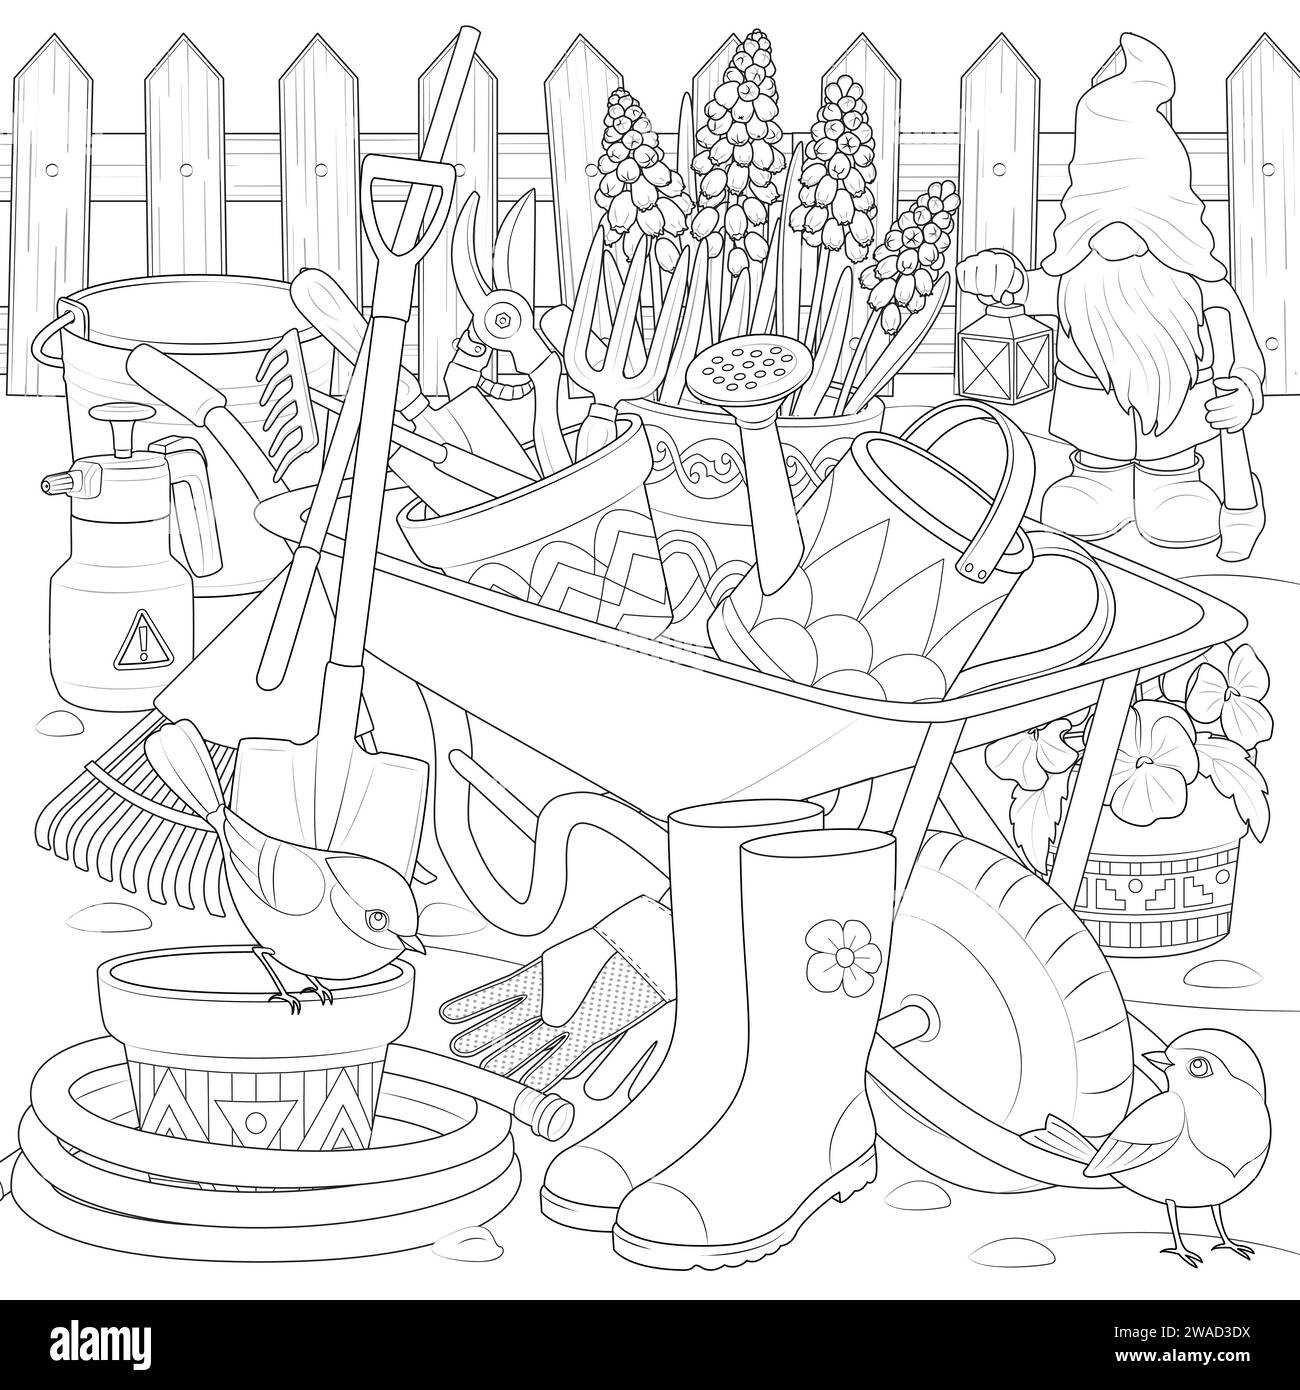 Wheelbarrow coloring page for kids stock vector image art